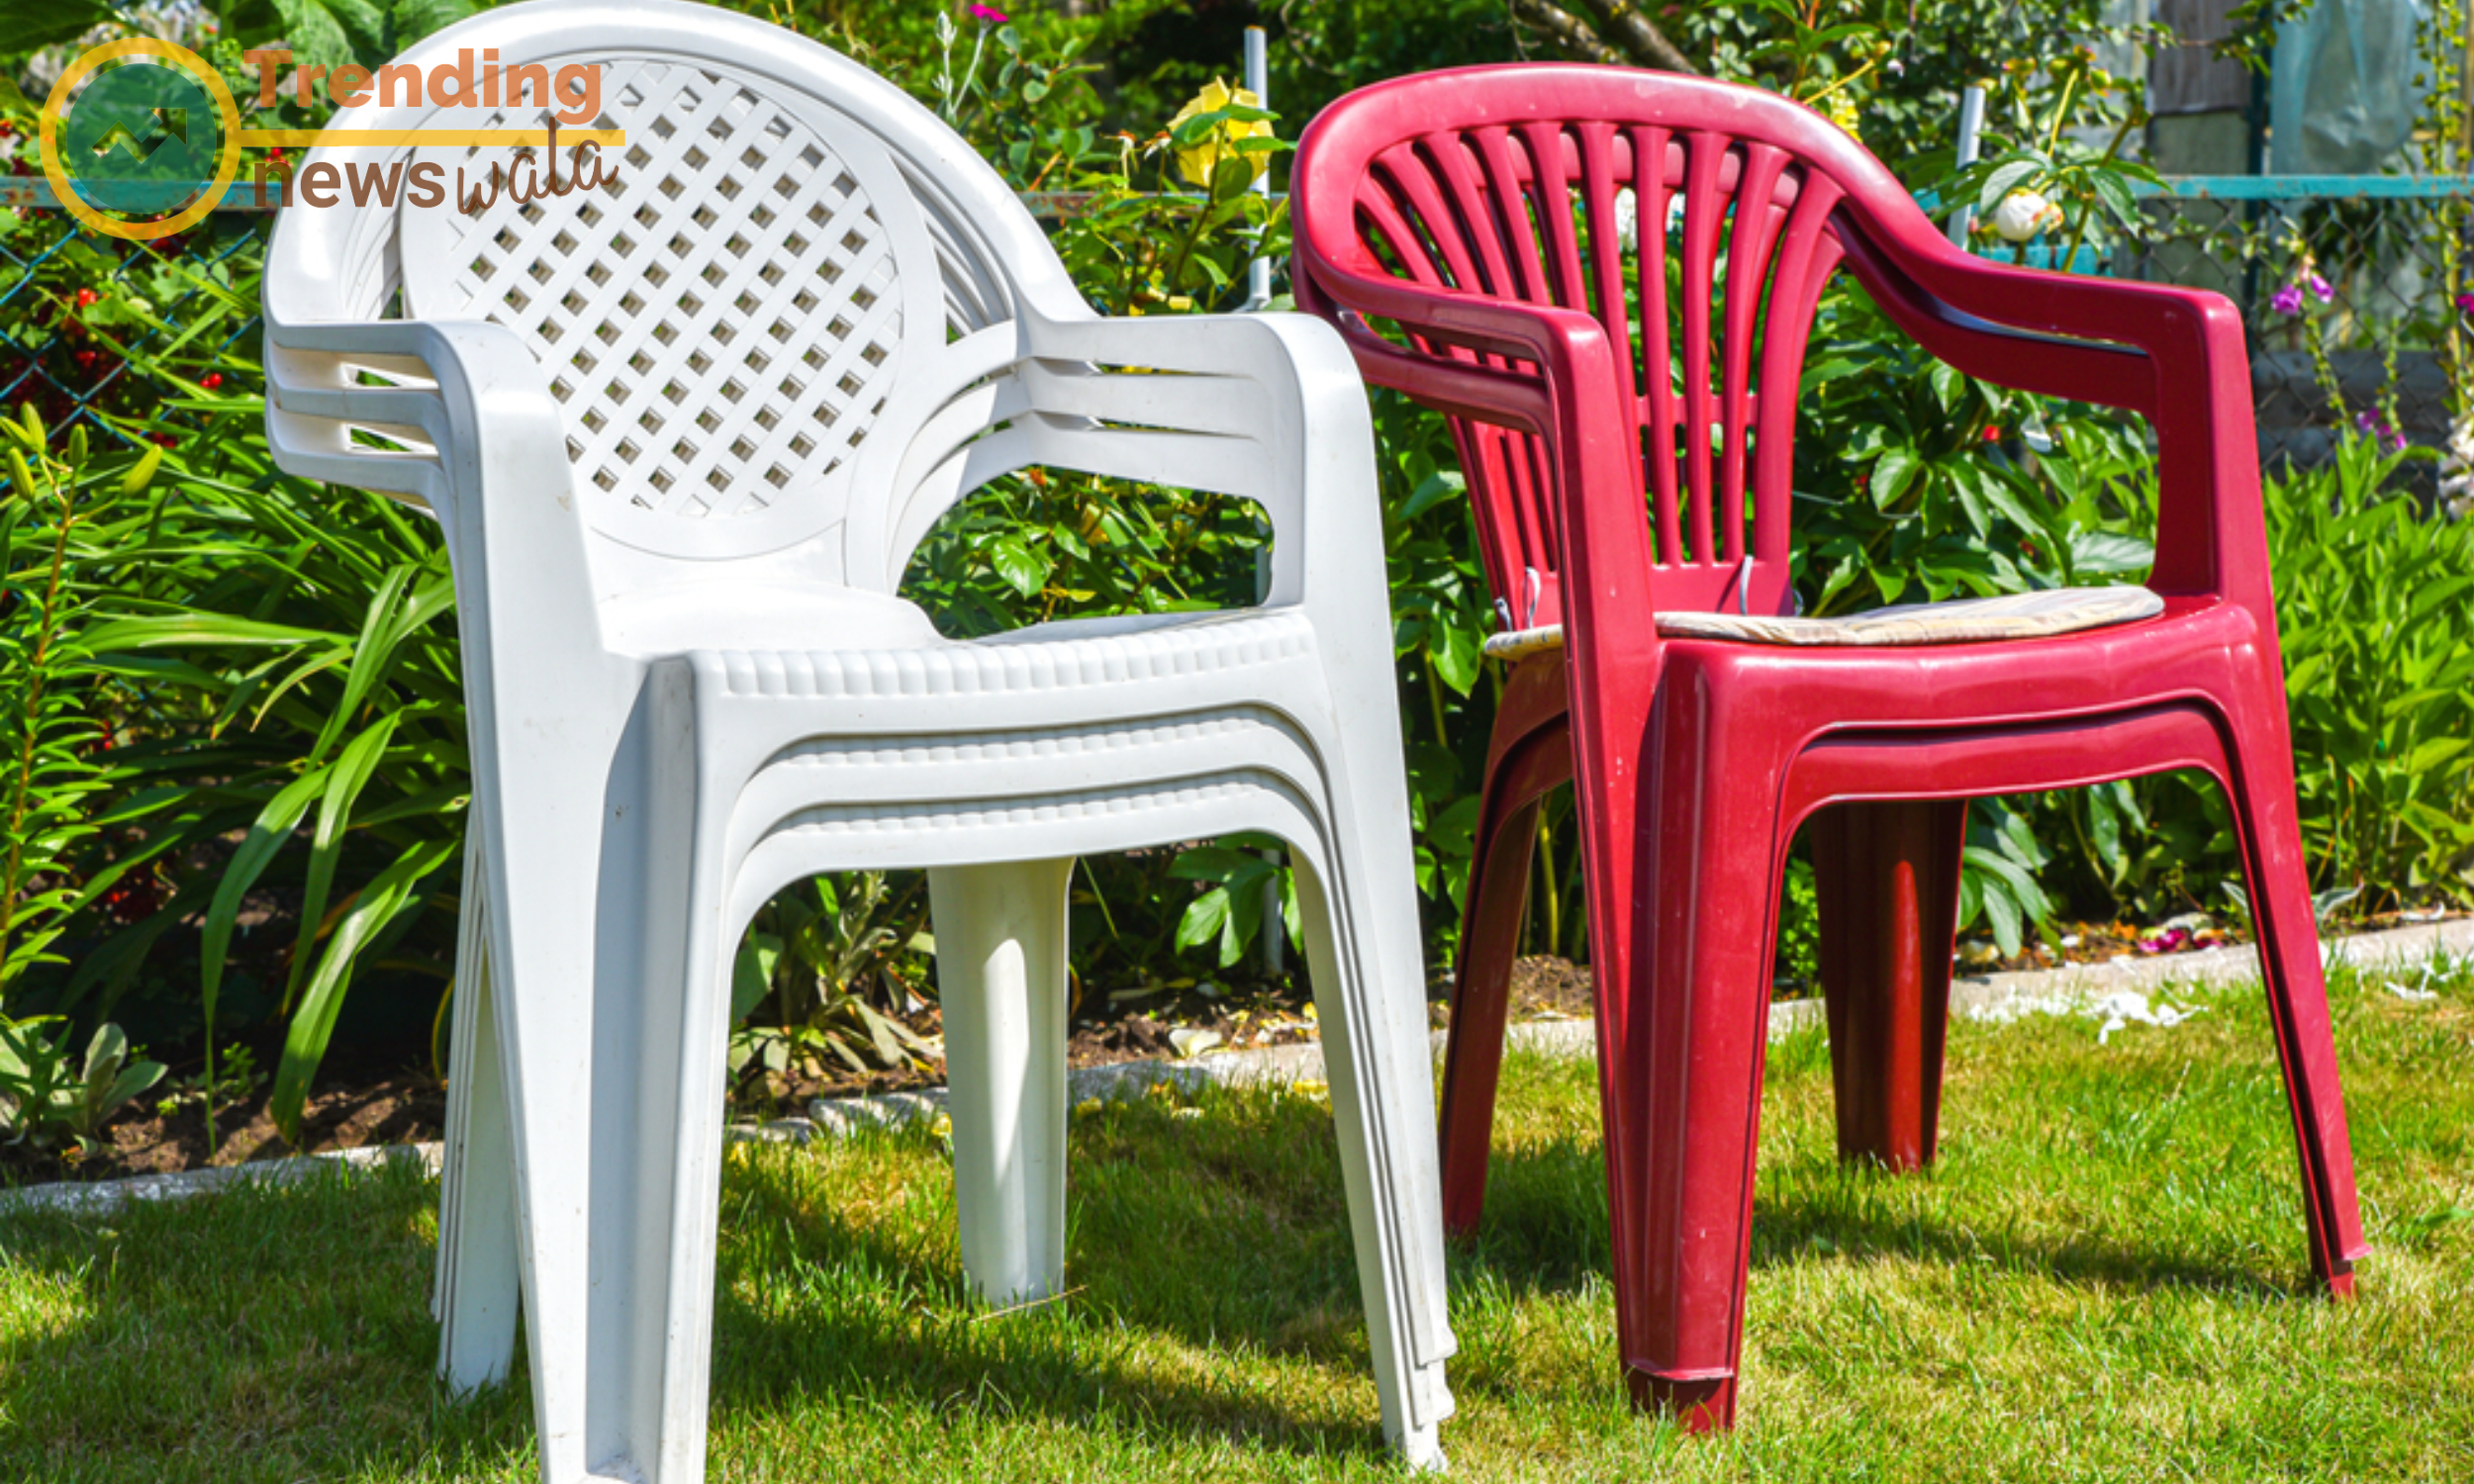 Injection-molded plastic chairs offer a canvas for playful patterns and designs